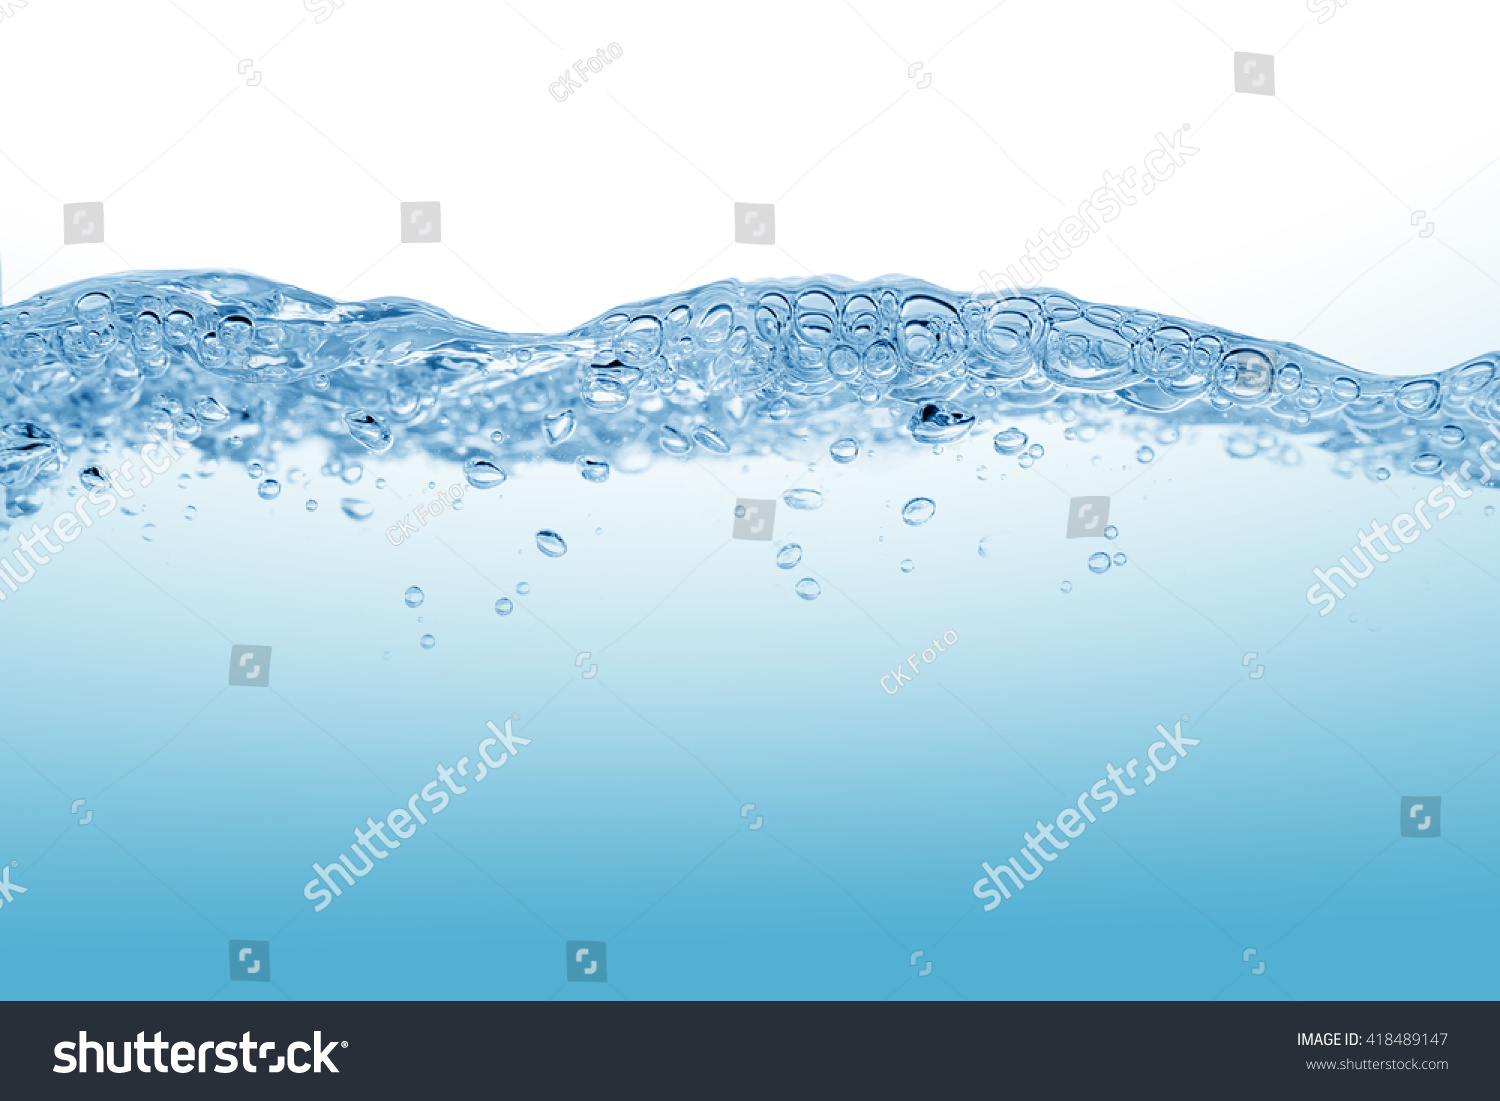 Water,water splash isolated on white background #418489147